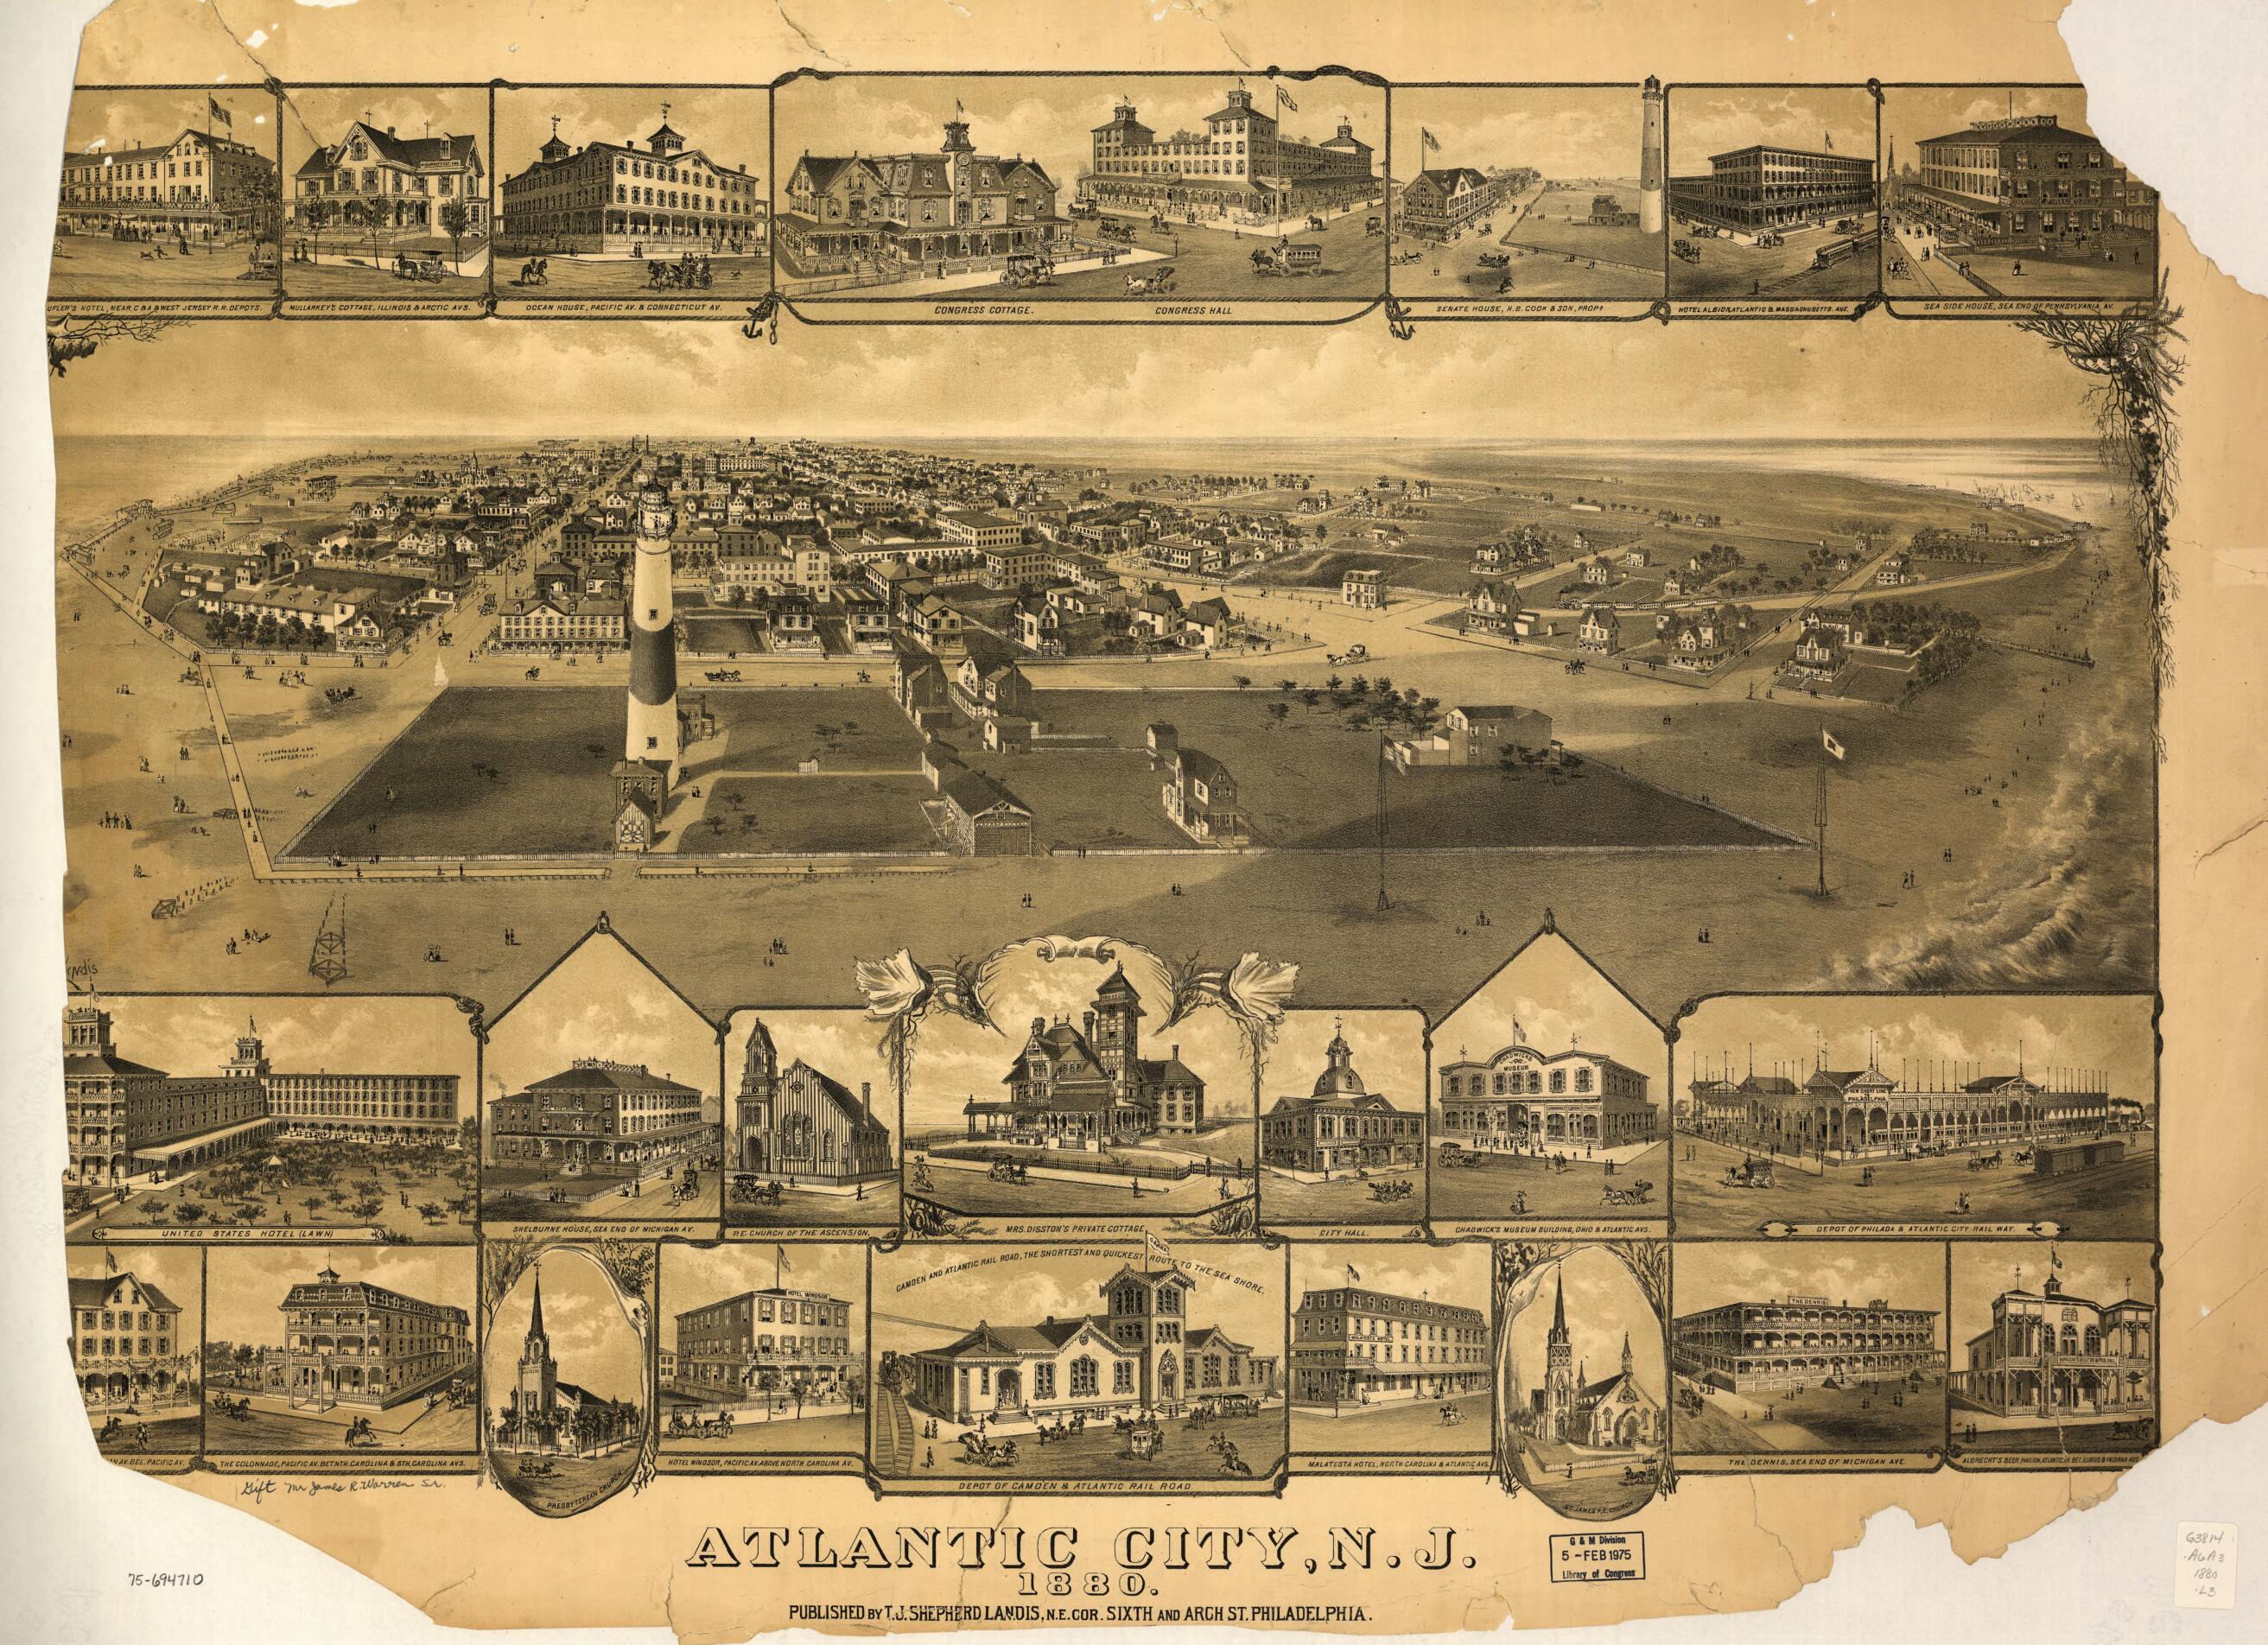 This old map of Atlantic City, New Jersey from 1880 was created by T. J. Shepherd Landis in 1880